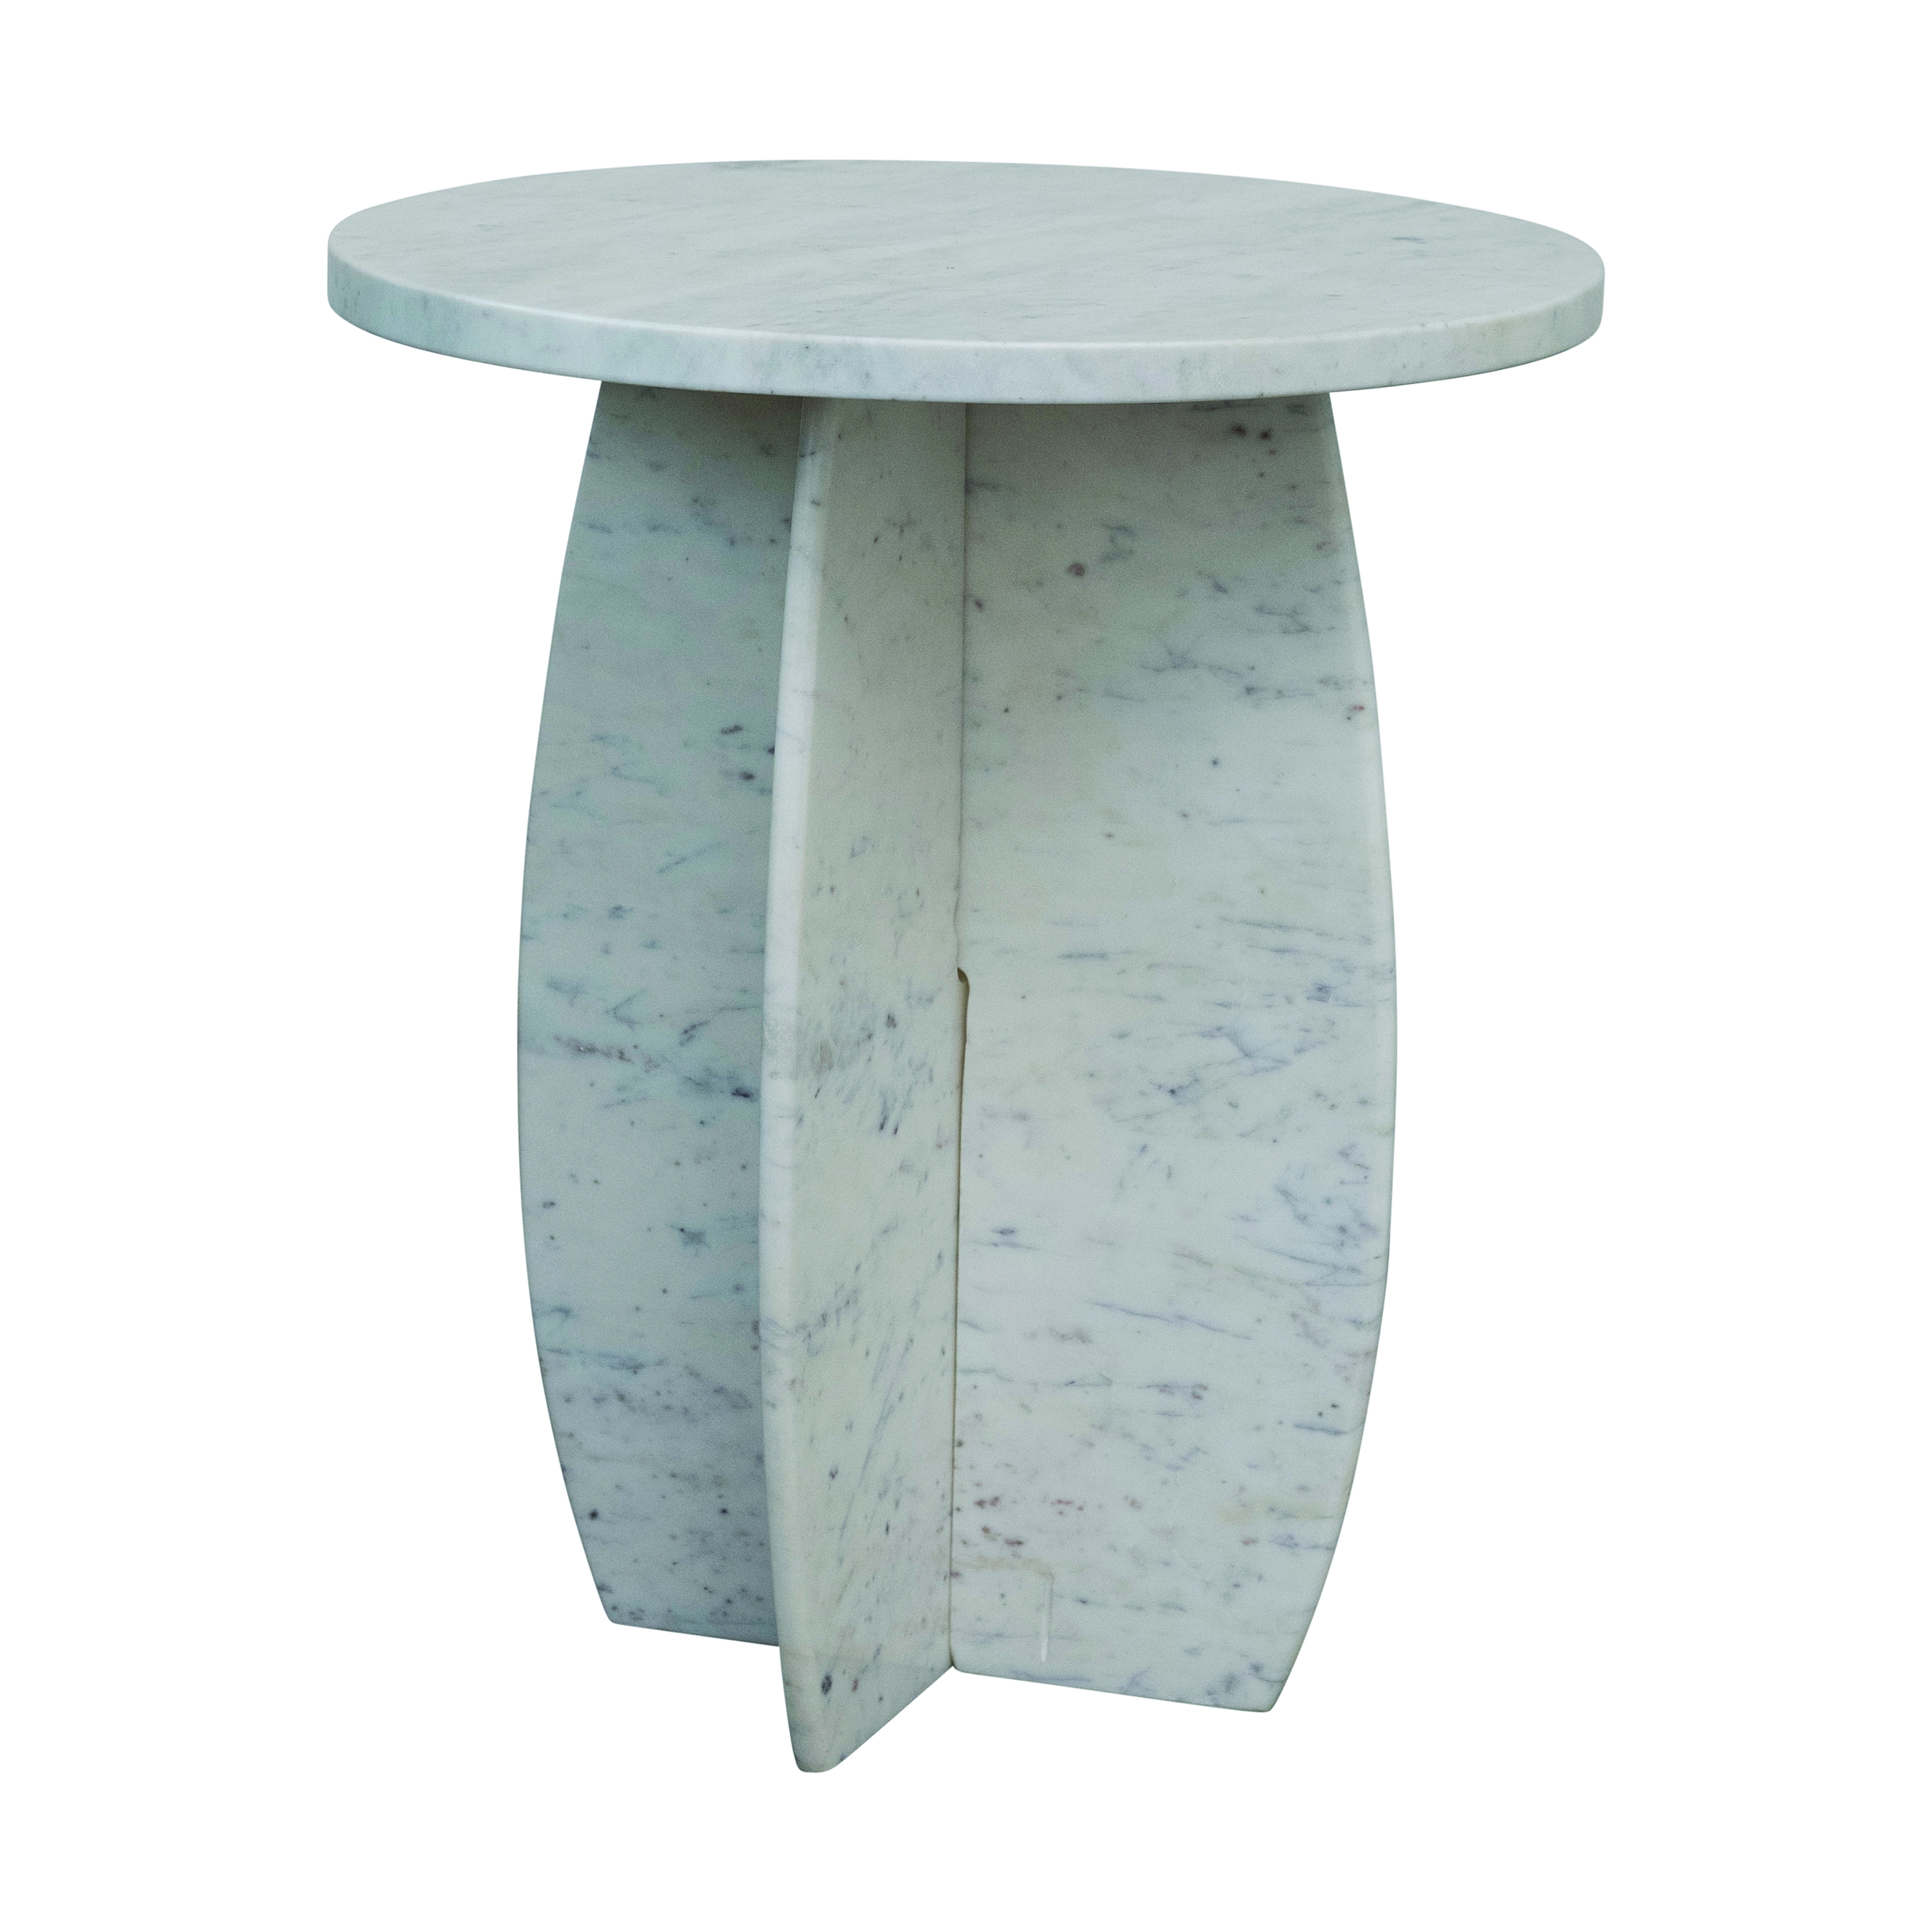 Modern Sculptural Marble Table with Interlocking Base, White - Image 0